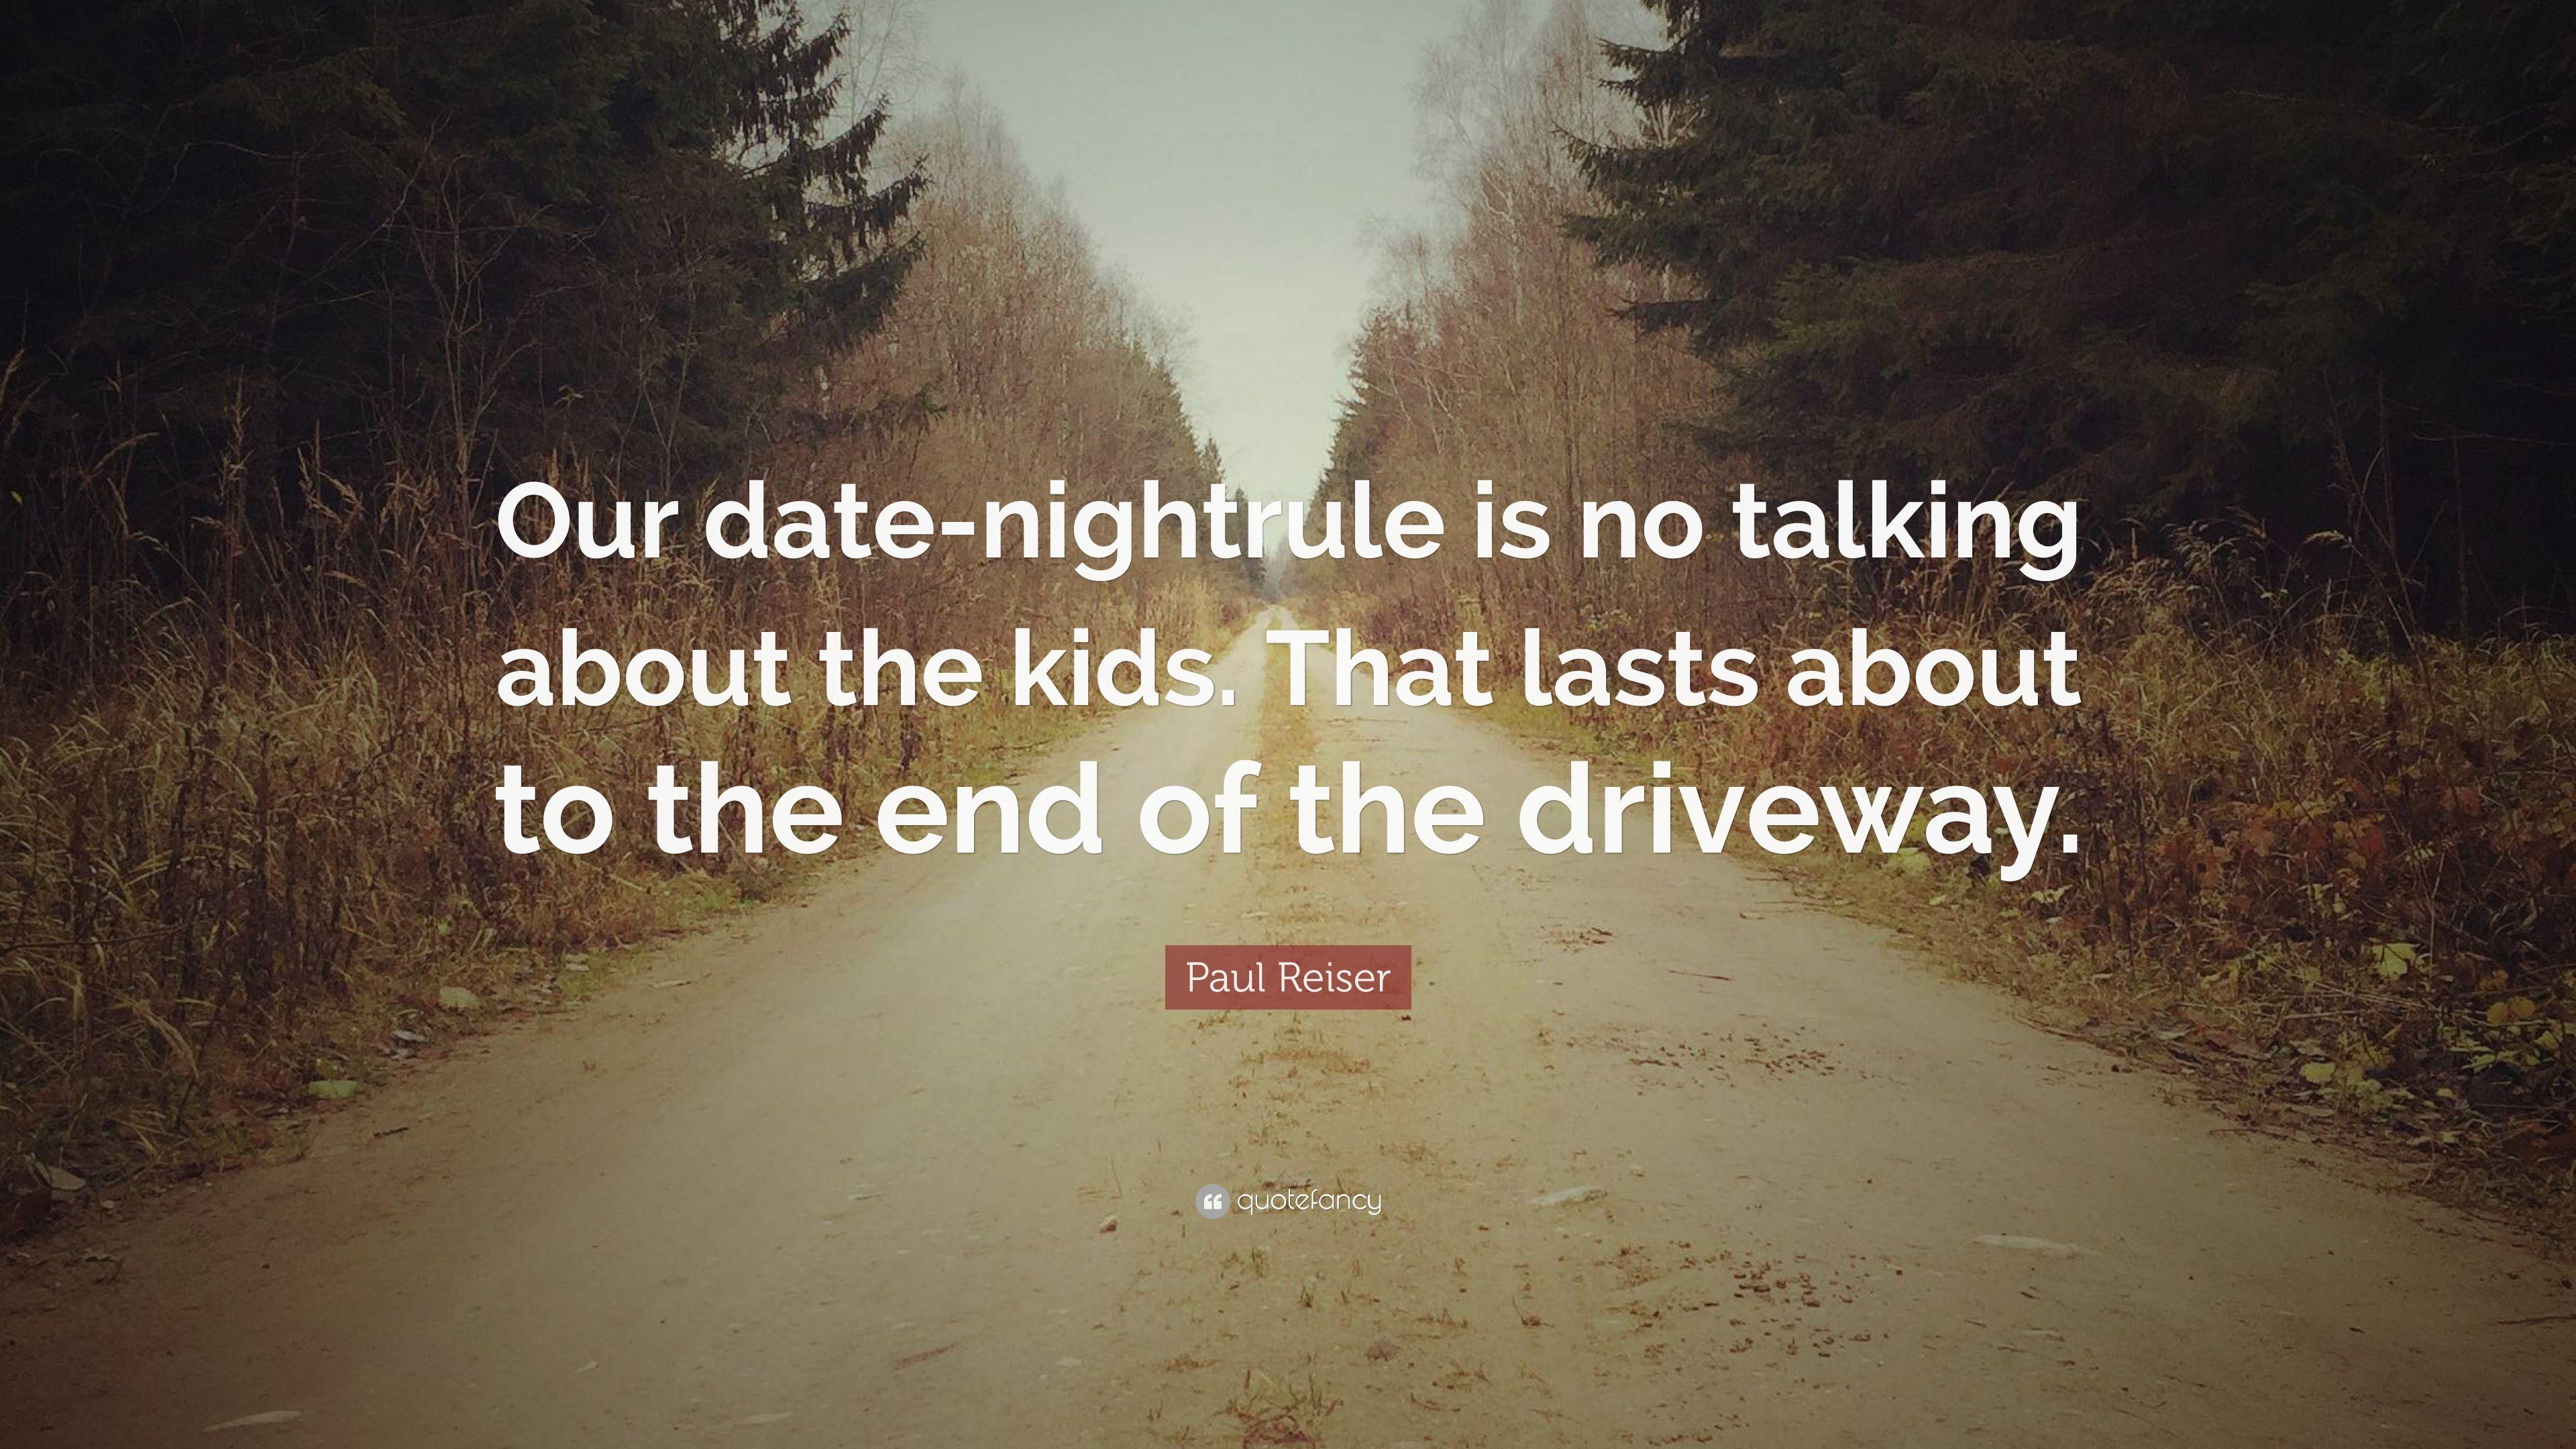 Paul Reiser Quote: “Our Date Nightrule Is No Talking About